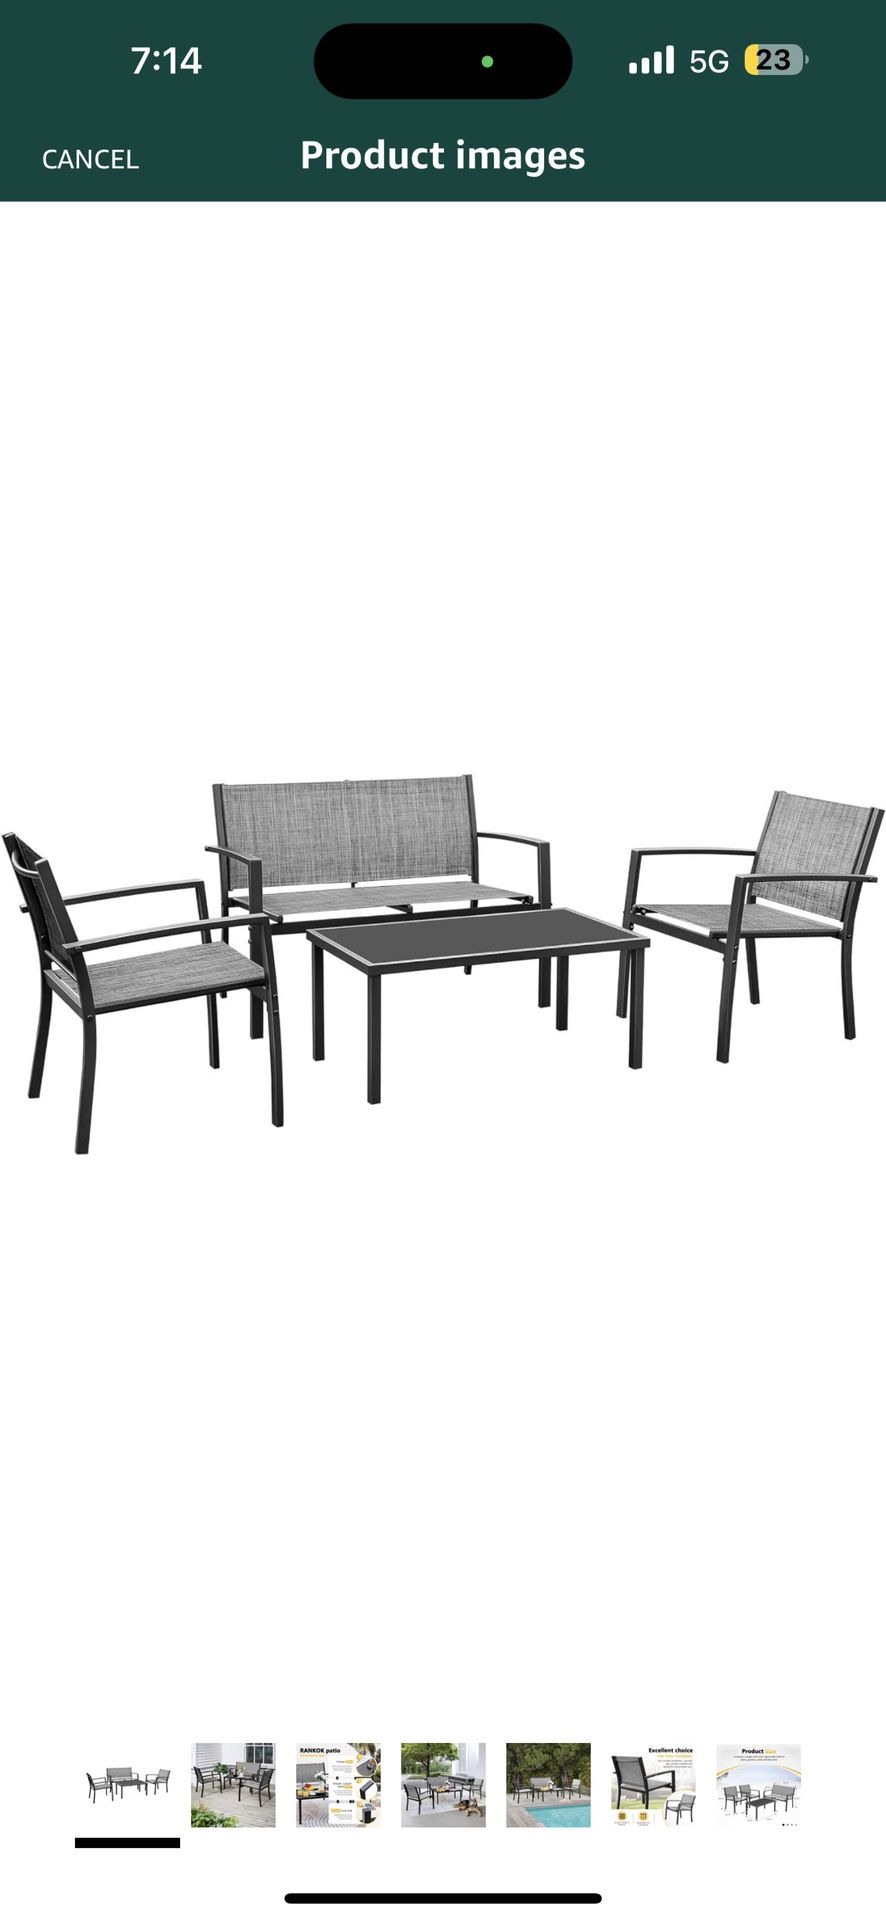 4 Pieces Patio Furniture Set Modern Patio Conversation Sets Textilene Outdoor Furniture Patio Chairs Set of 4 with Loveseat Coffee Table for Porch Law